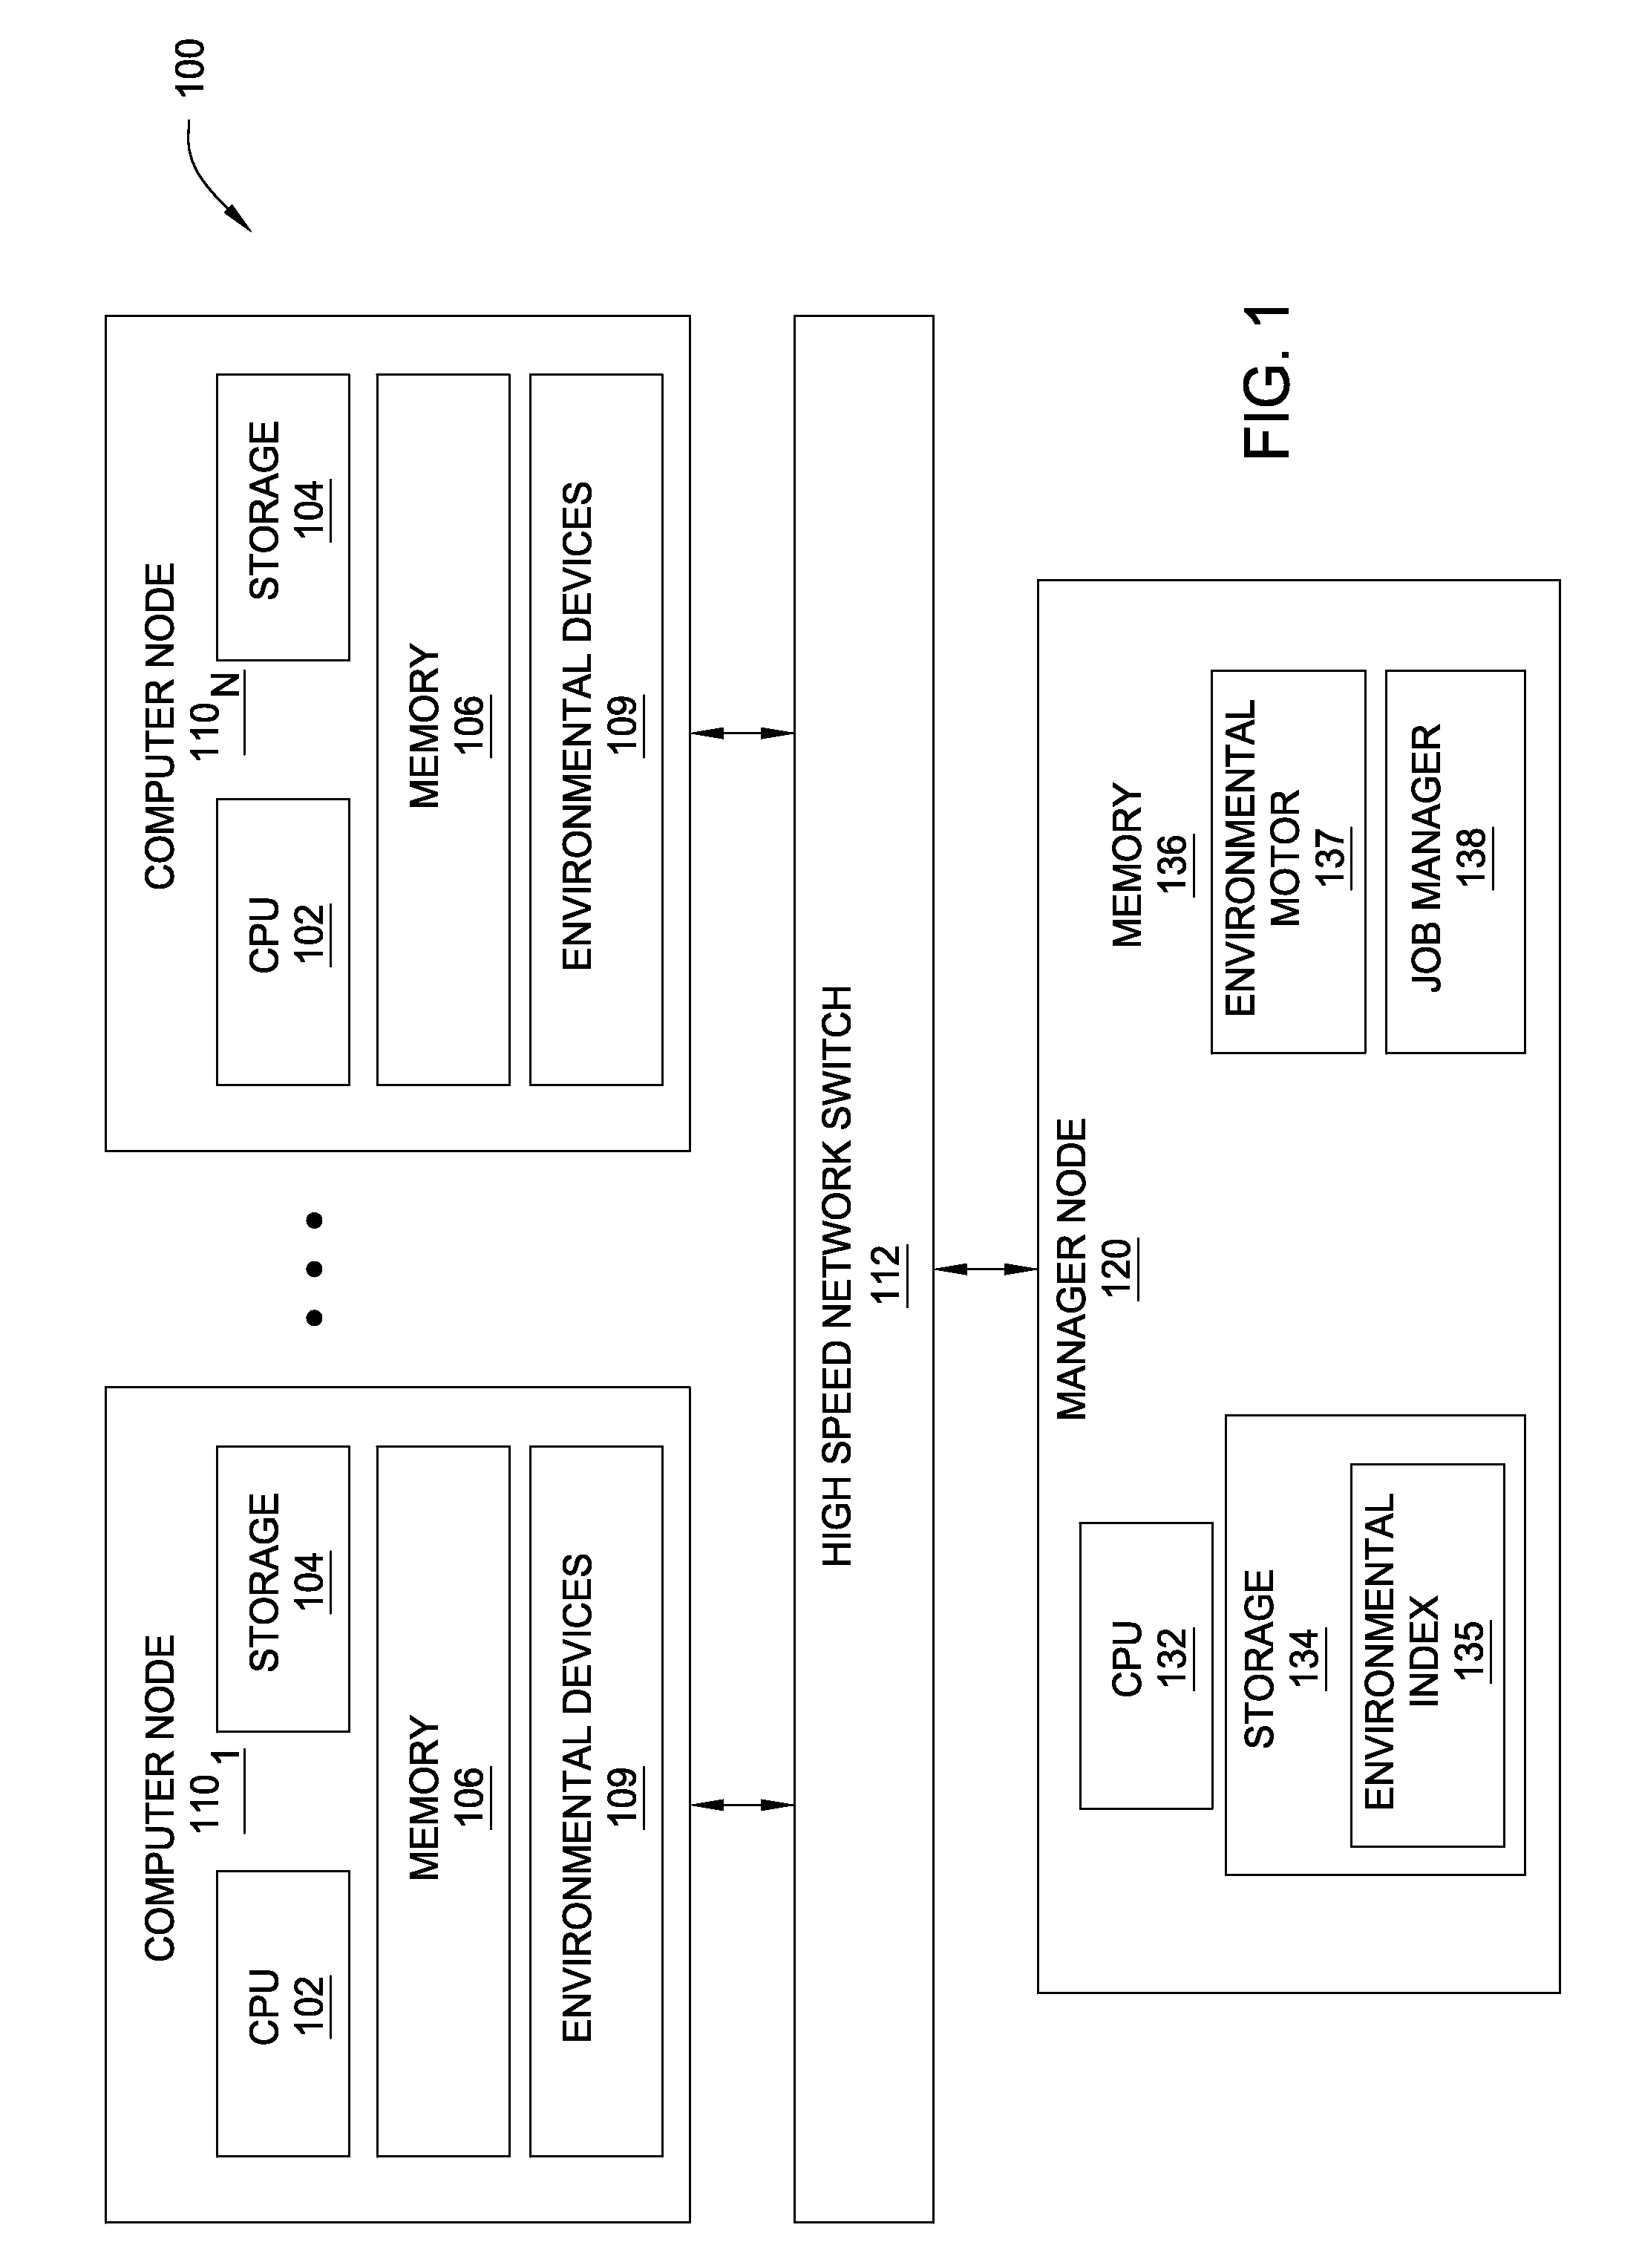 Scheduling jobs of a multi-node computer system based on environmental impact